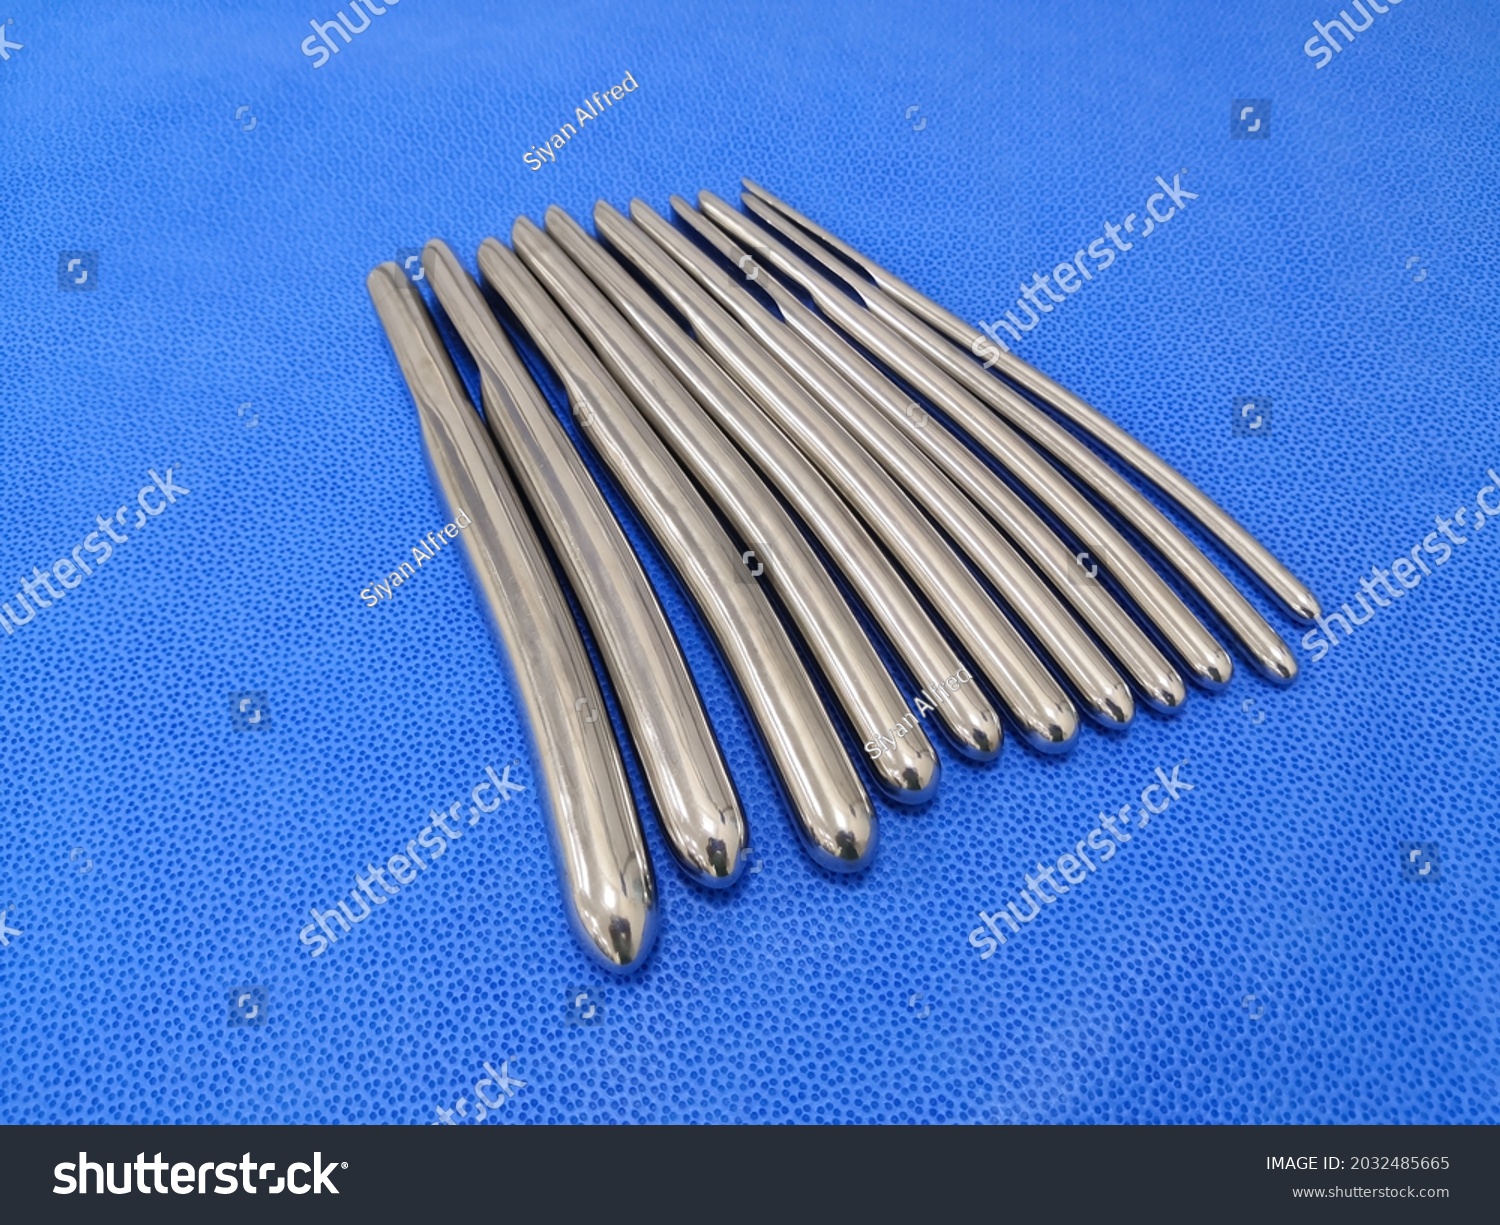 Closeup Image of Medical Surgical Single End Urethral Dilator Set In Different Size Using For Medical Examination  Diagnostic Procedure. Selective Focus #2032485665